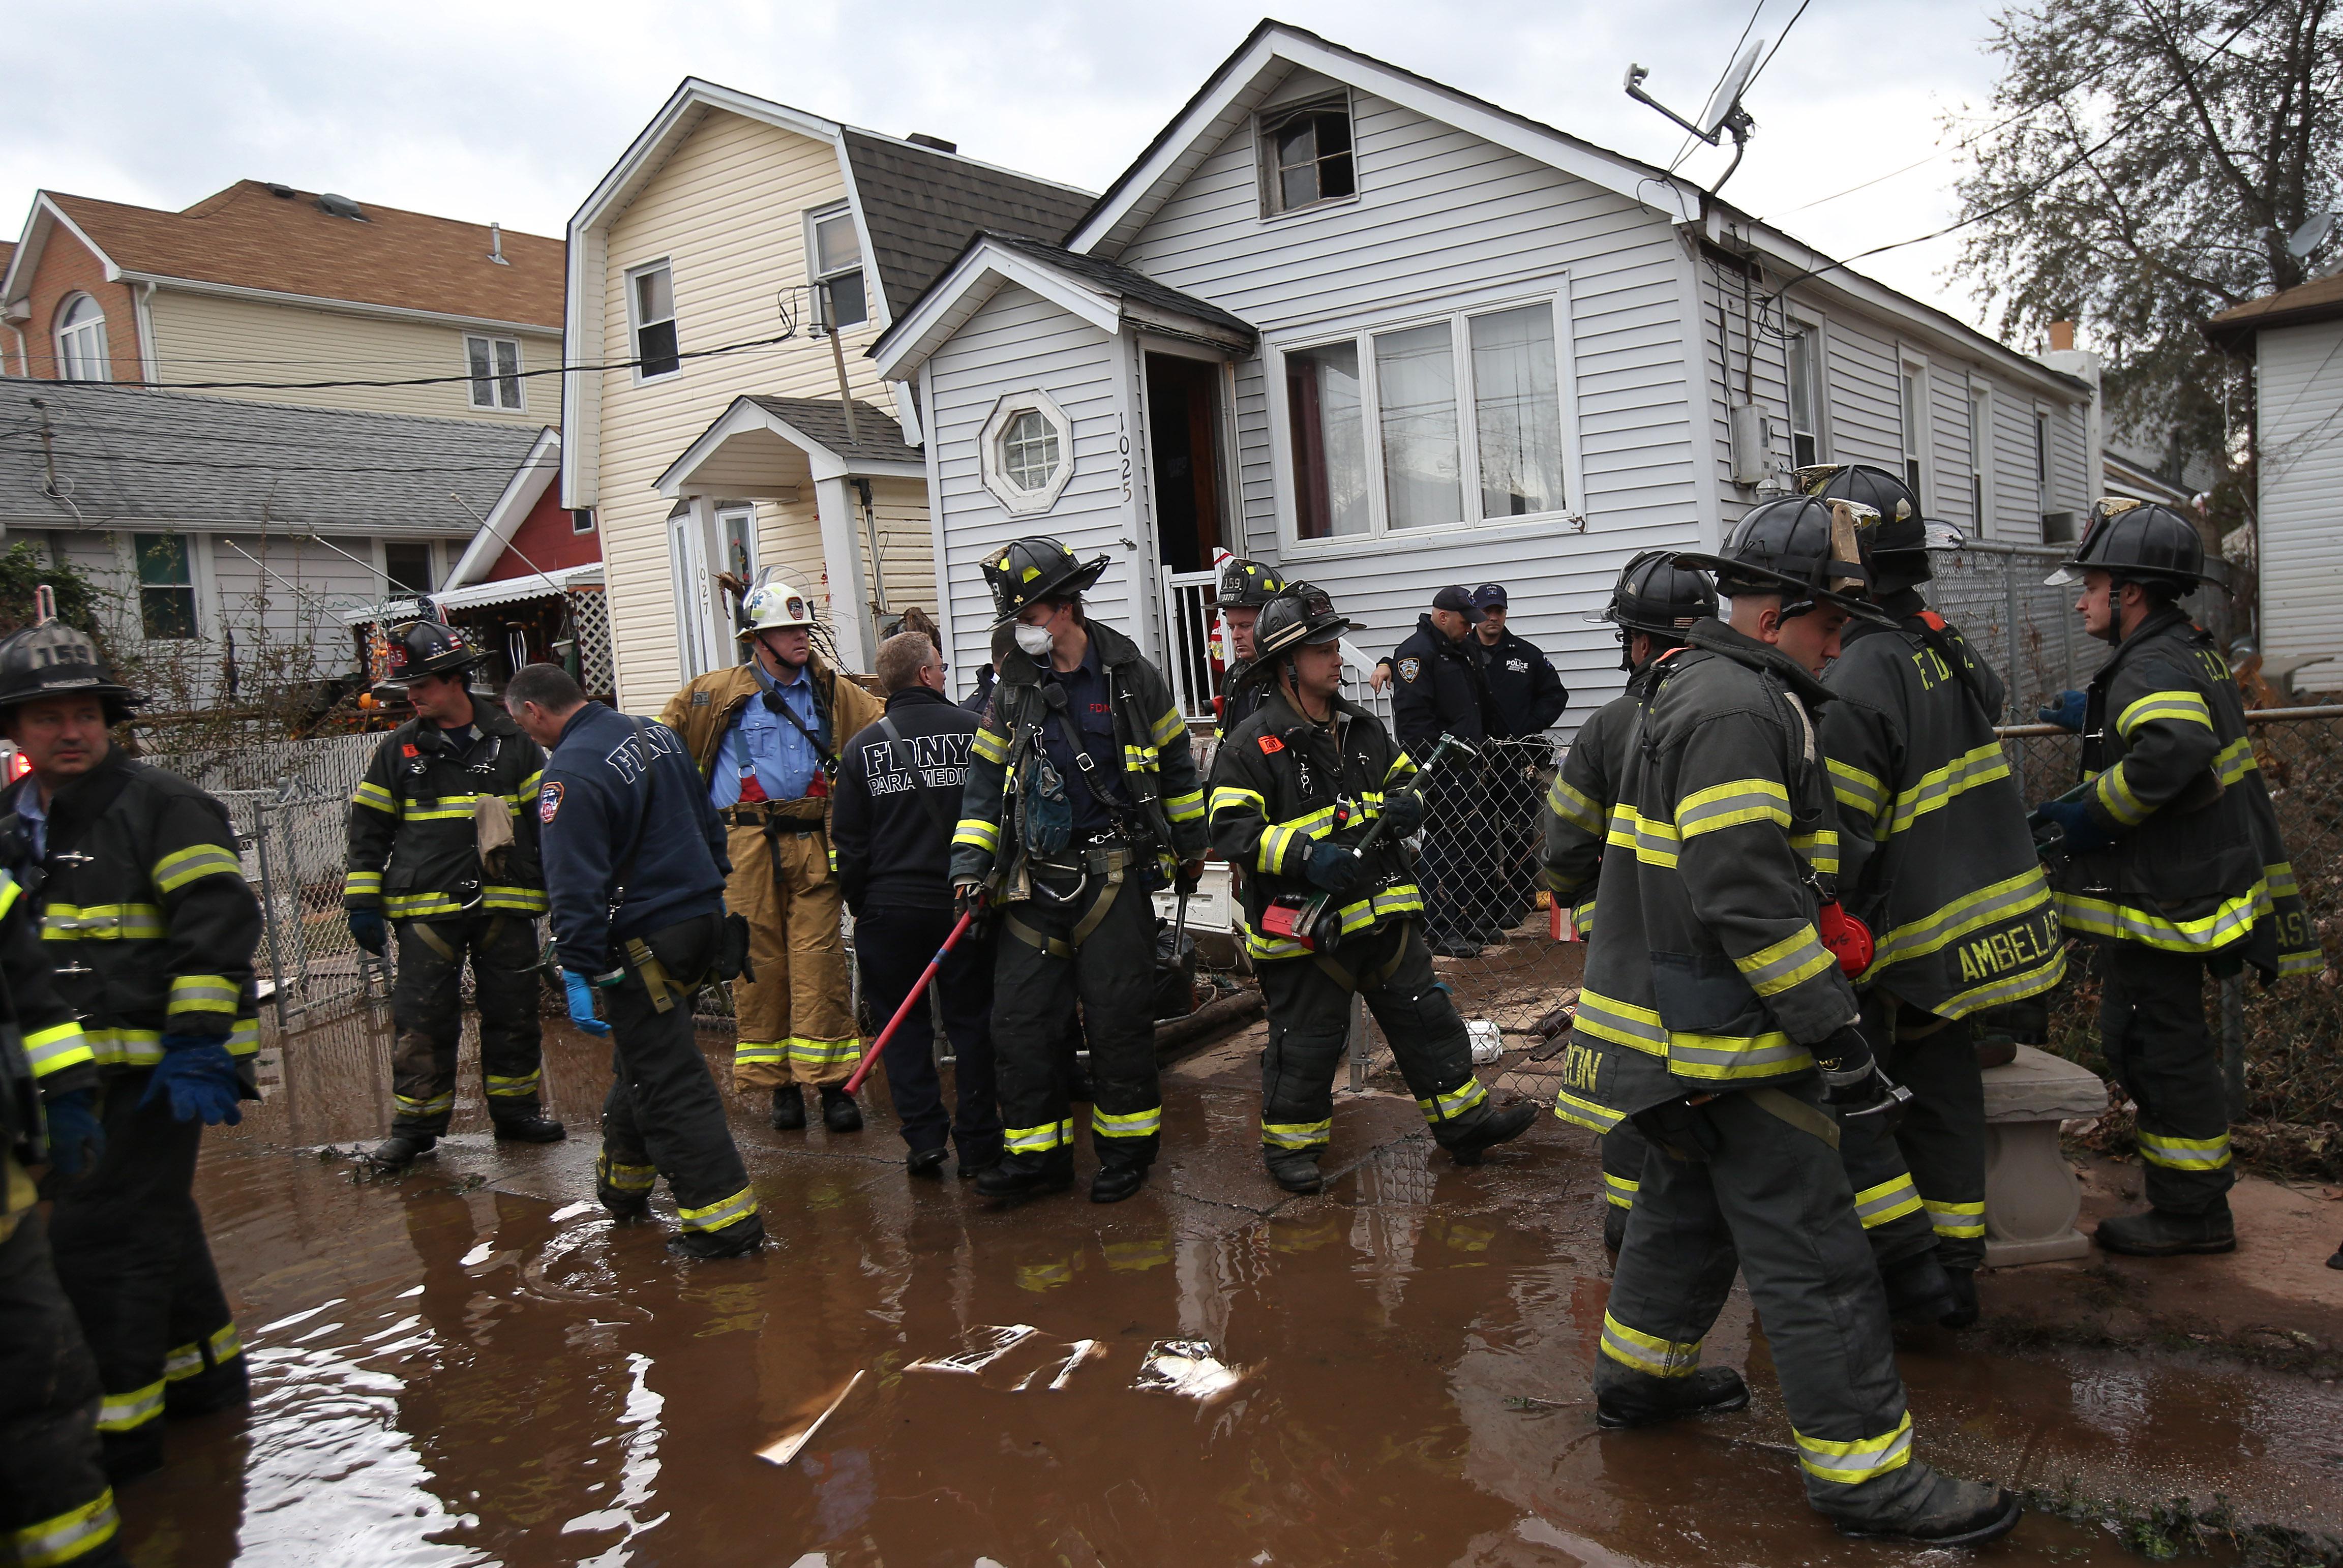 Firemen gather outside a house where the bodies of two elderly people were reportedly found on November 2, 2012 in the Staten Island borough of New York City.